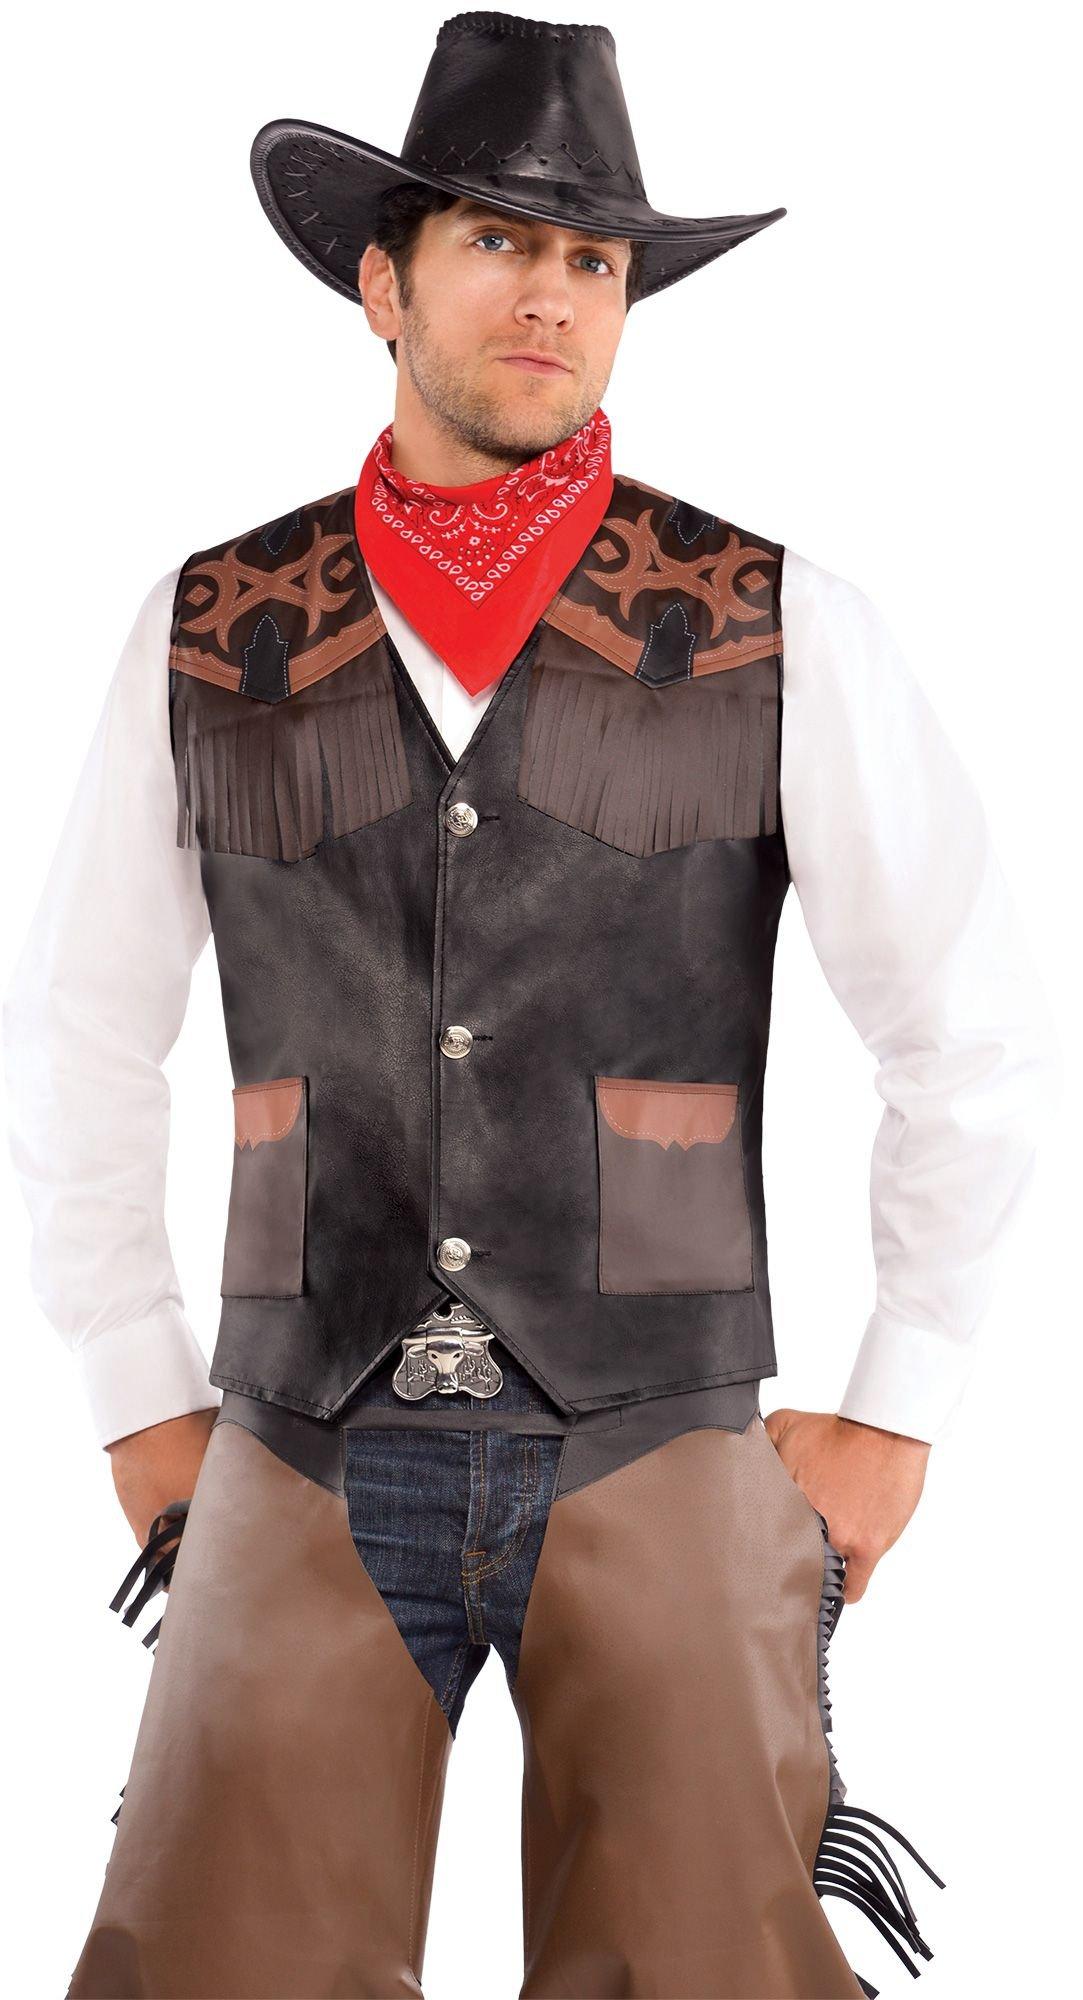 Fringe Cowboy Costume Deluxe Wild West Cowboy Fancy Dress Outfit Adults